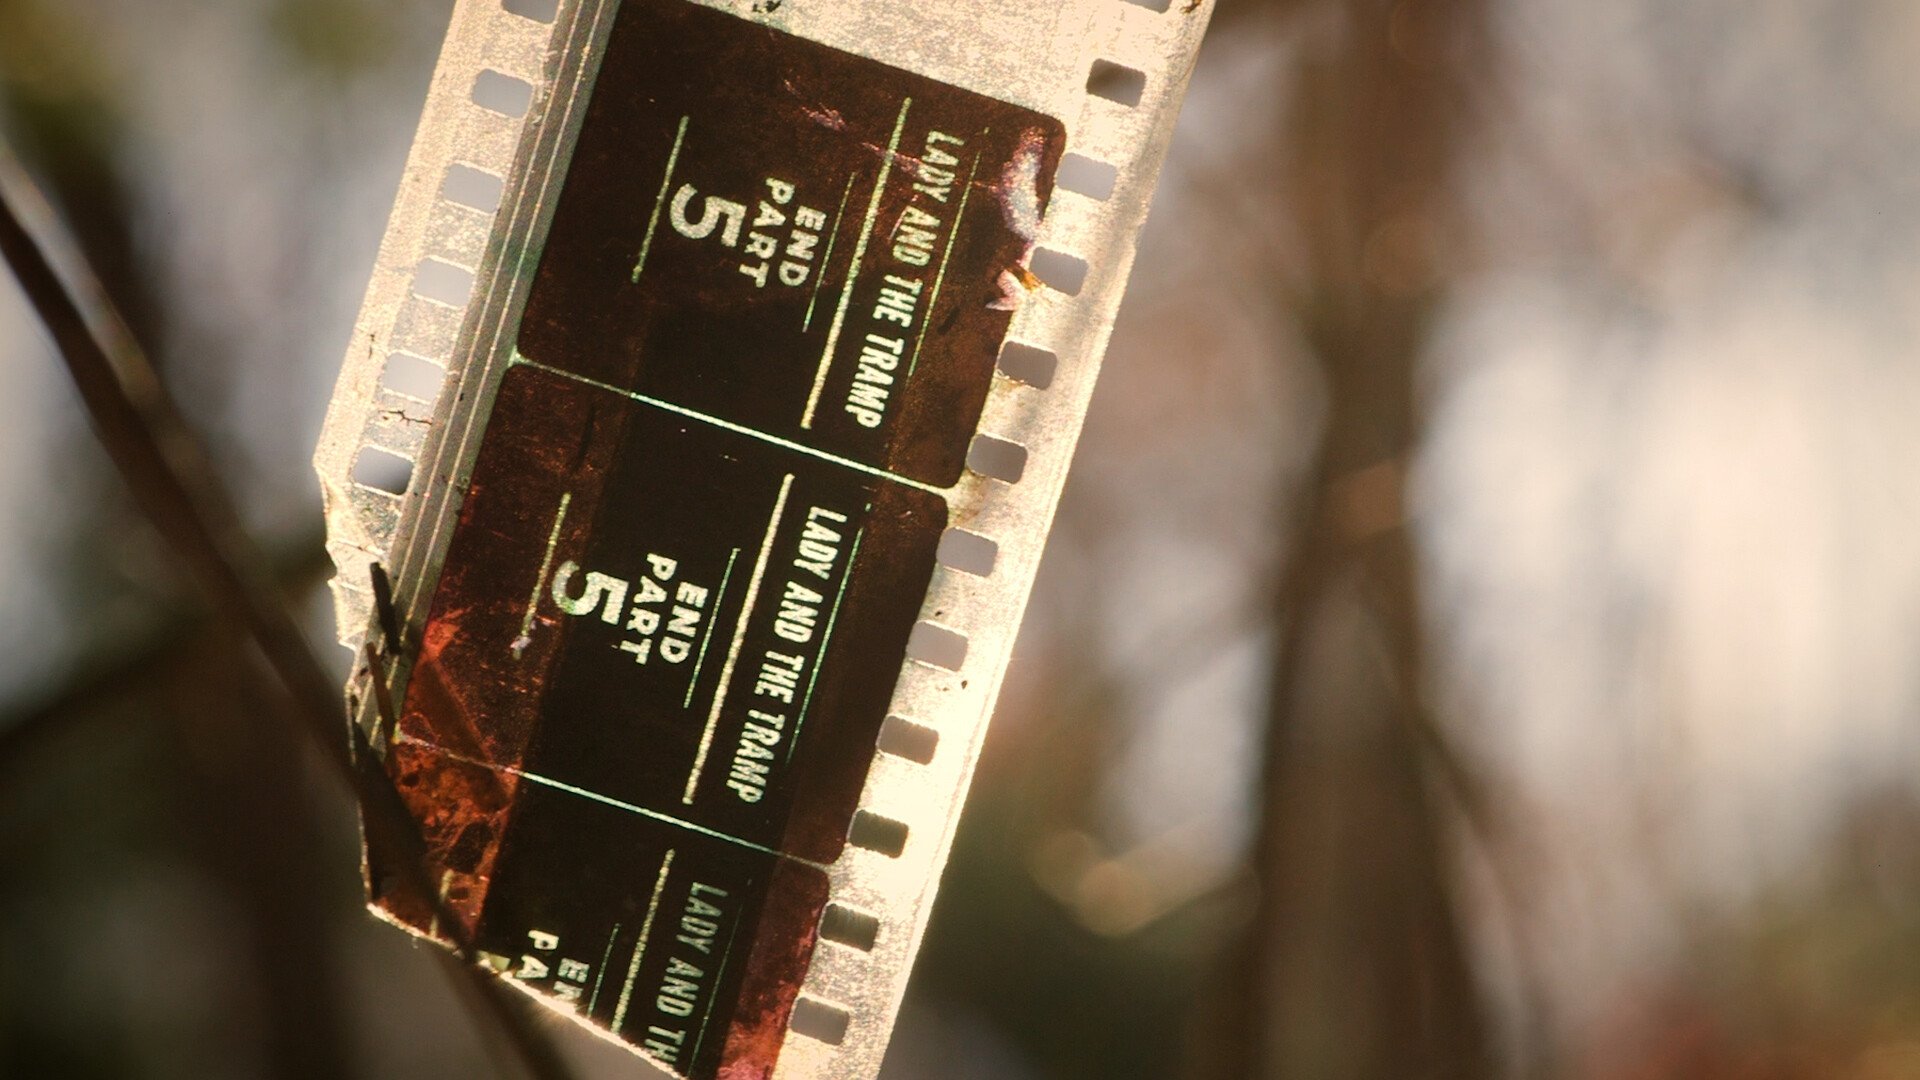 35mm film strip showing 'Lady and the Tramp' title and 'end part 5'